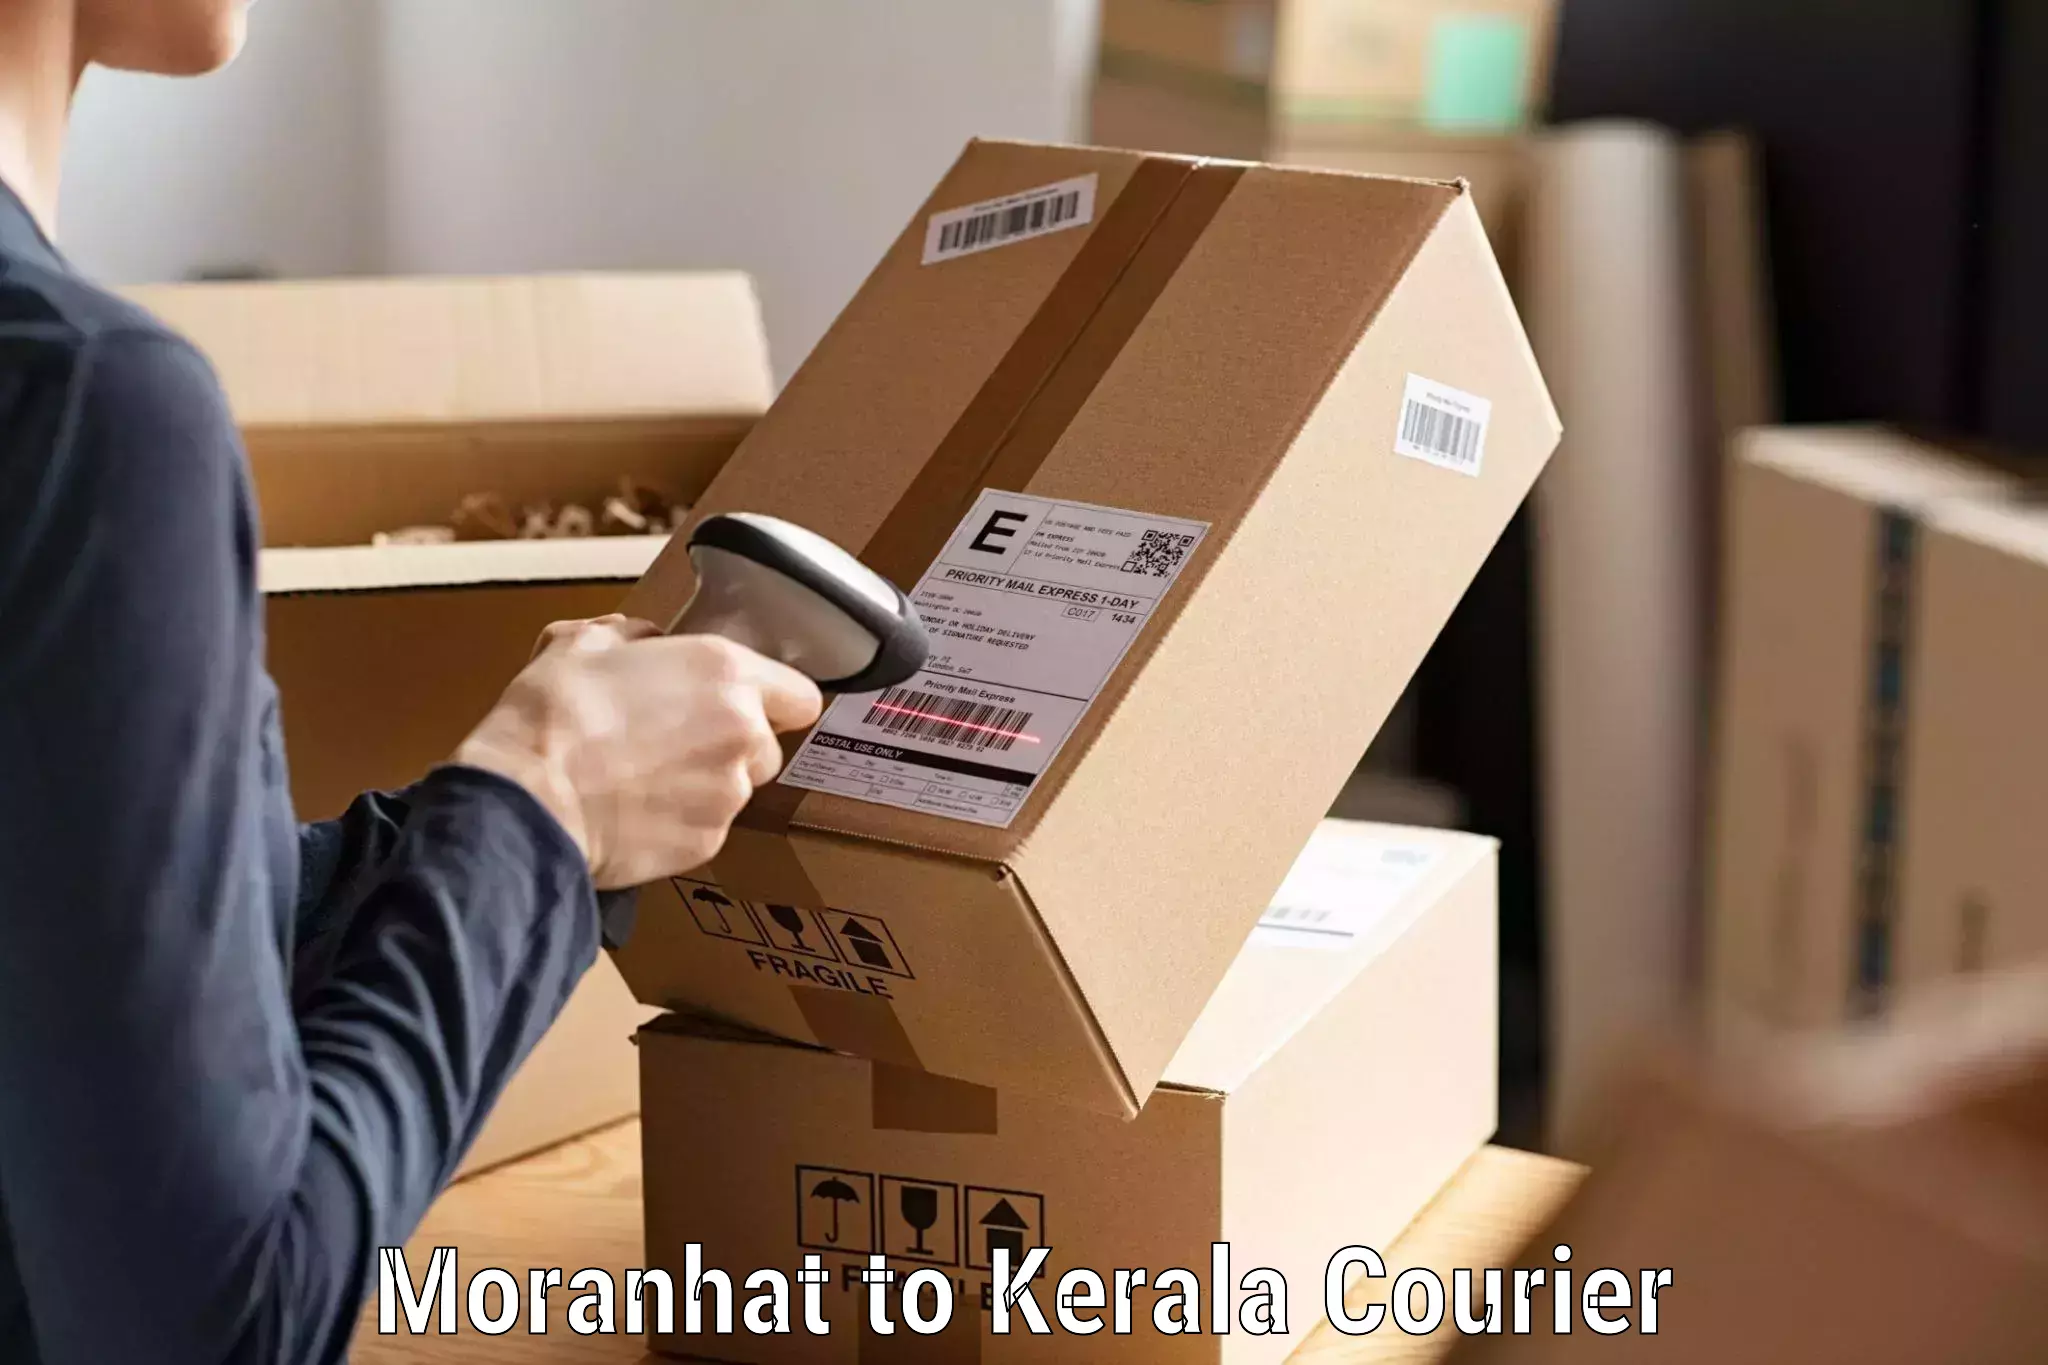 Cash on delivery service Moranhat to Kerala